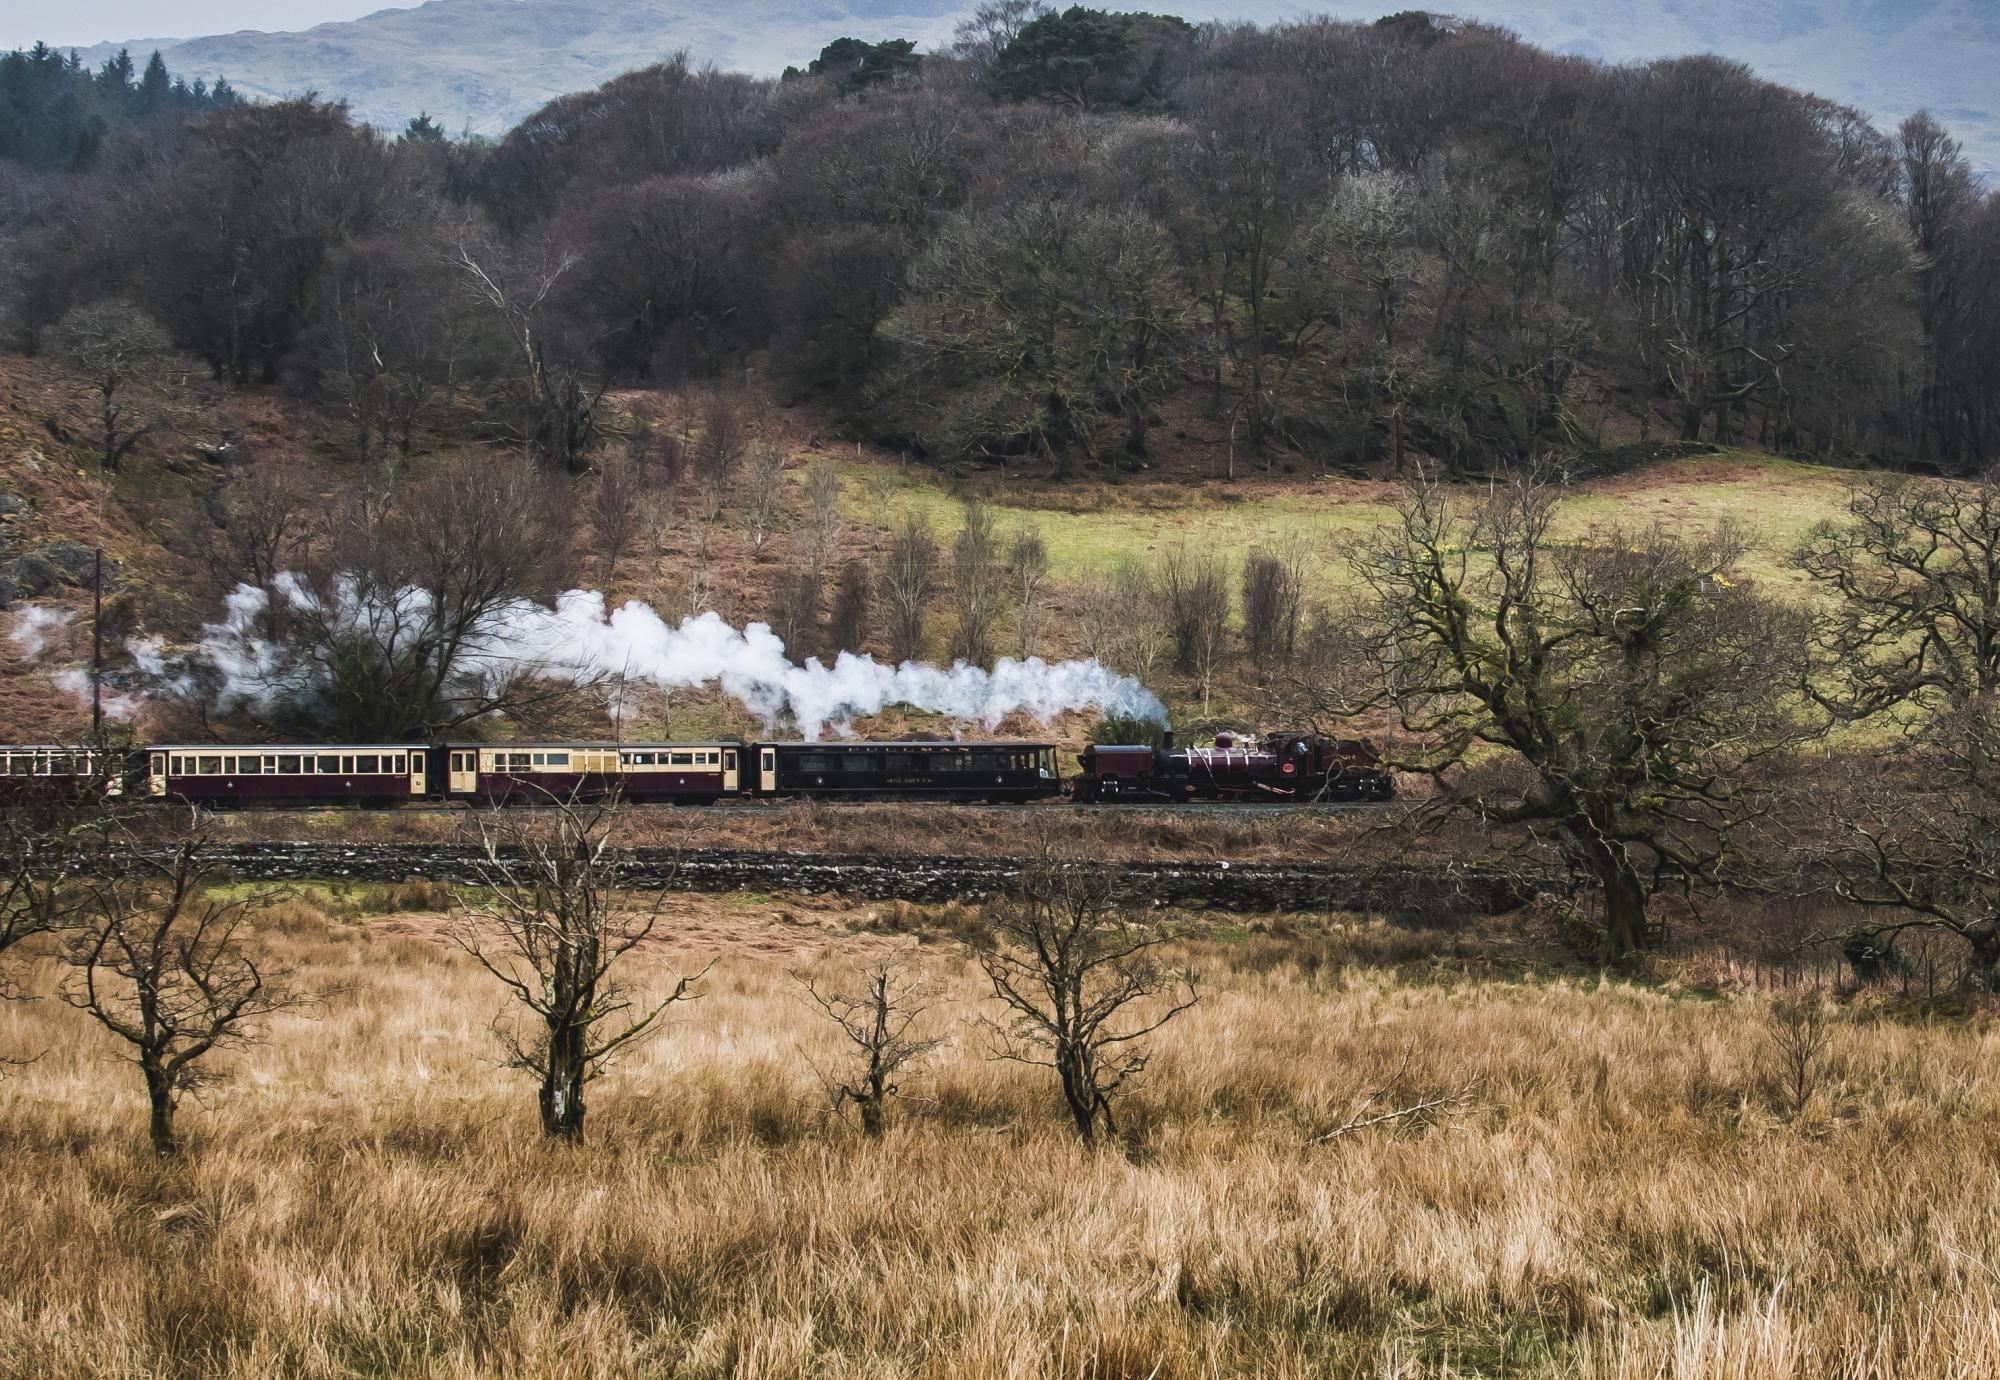 A steam train passing through the small village of Beddgelert, North Wales, via Istock 